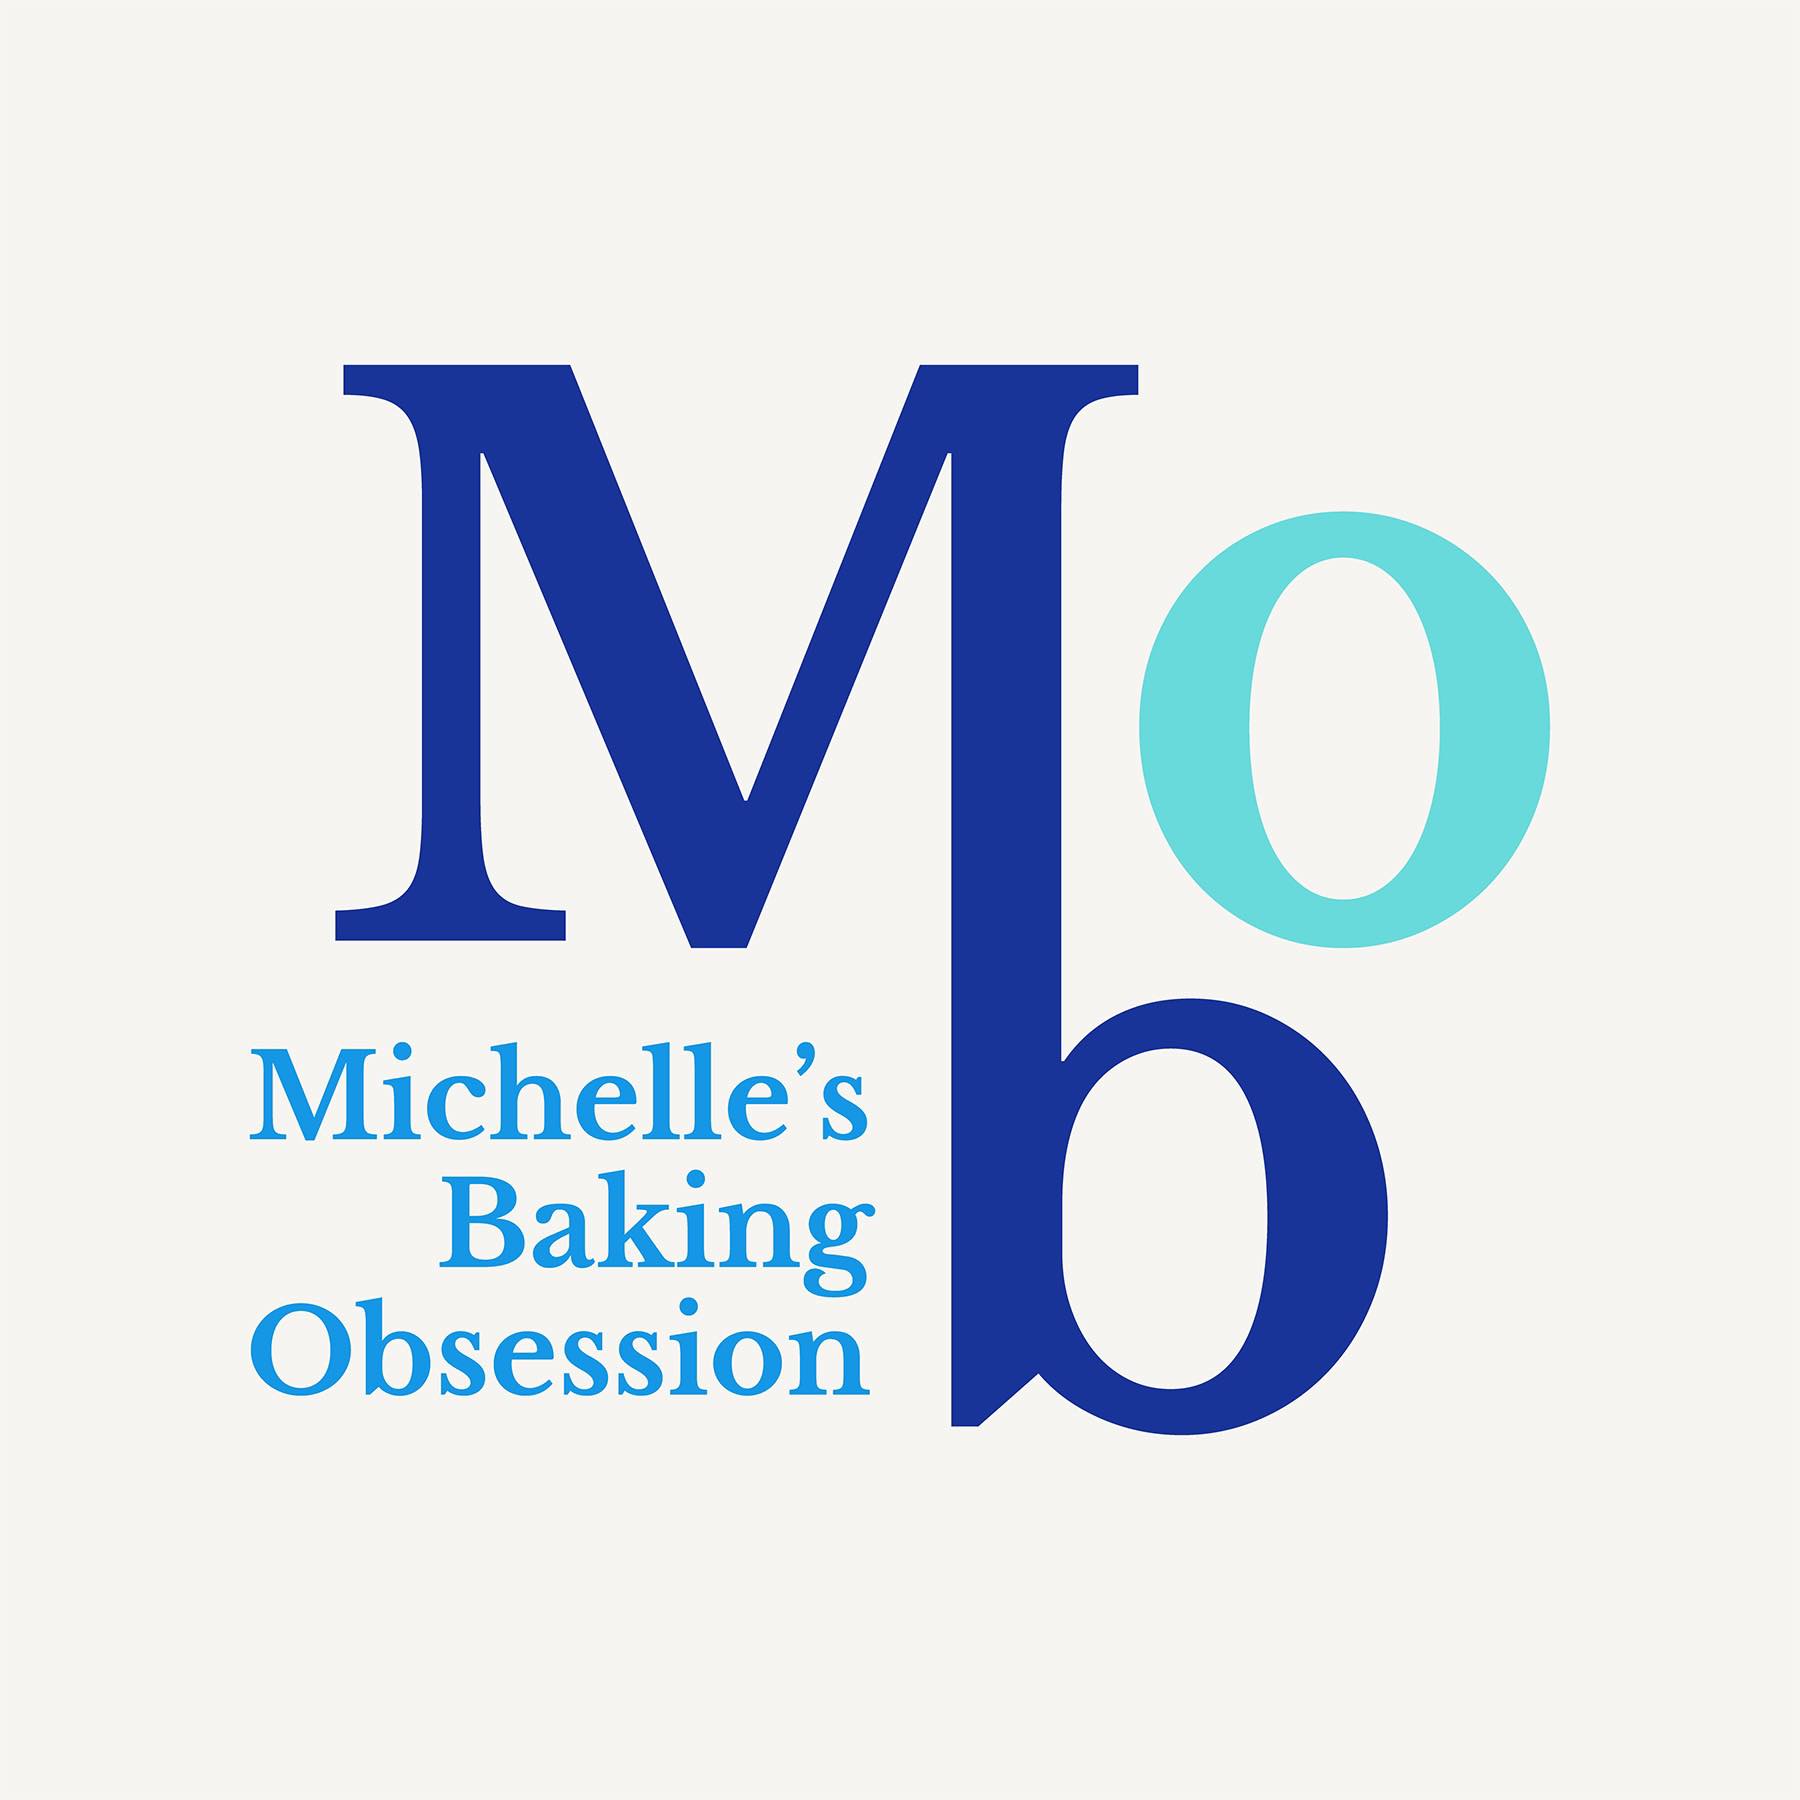 Michelle's Baking Obsession logo